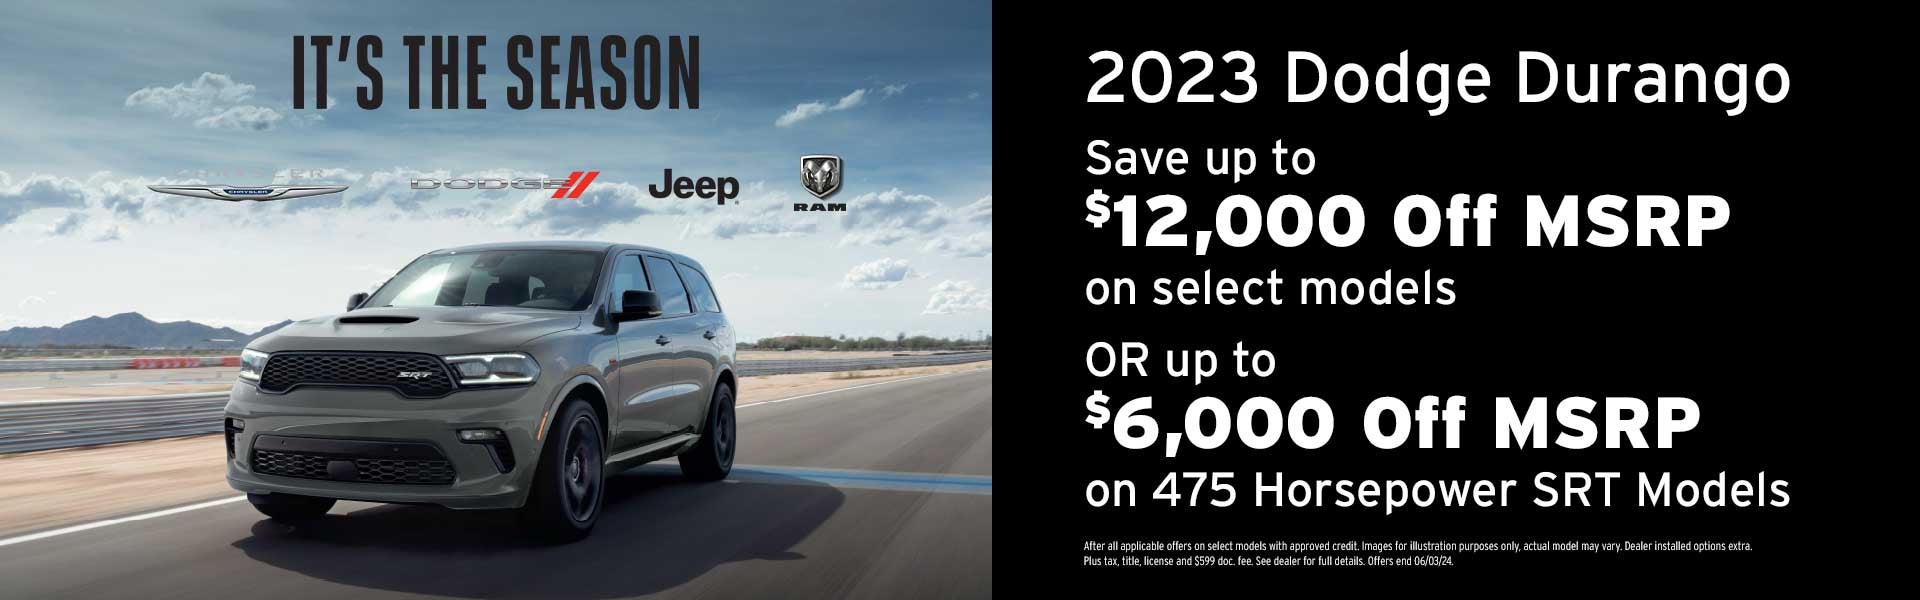 Save up to $12,000 on a new Dodge Durango